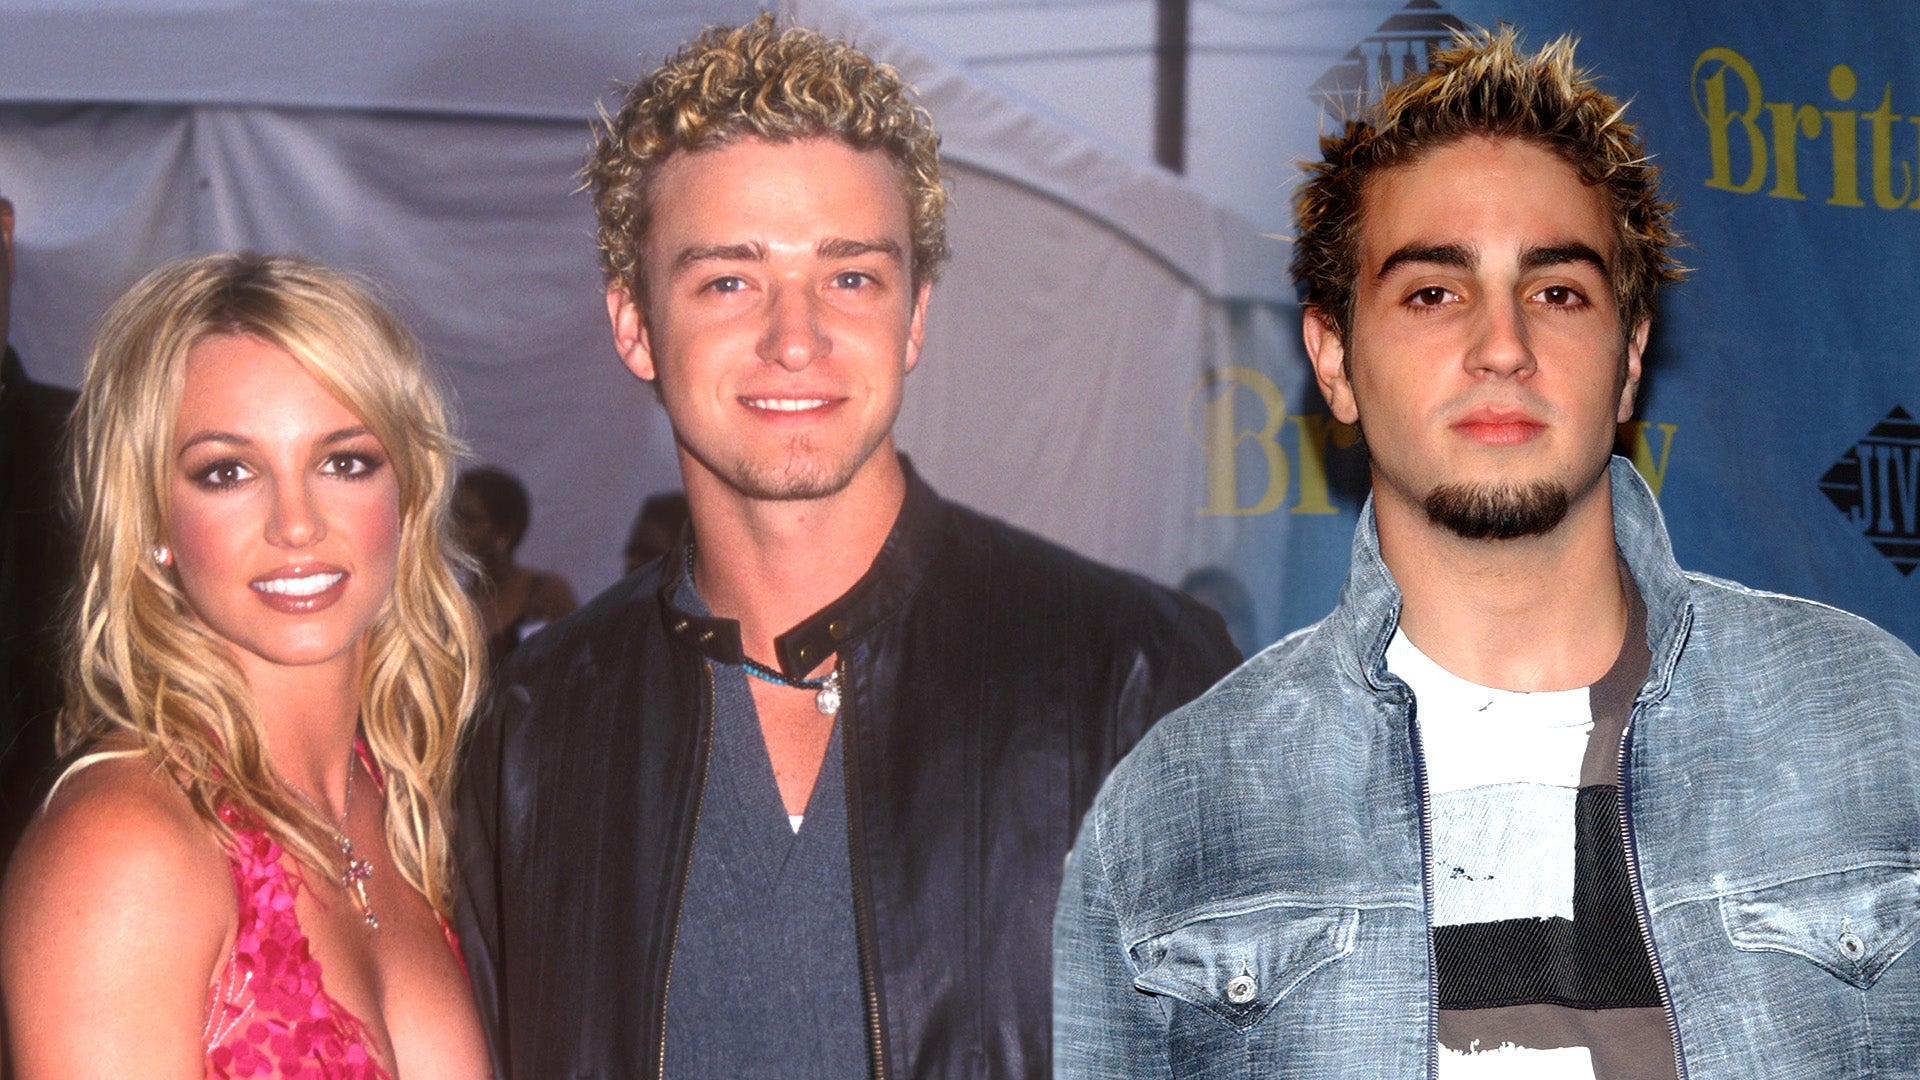 Justin Timberlake supports Britney Spears amid conservatorship